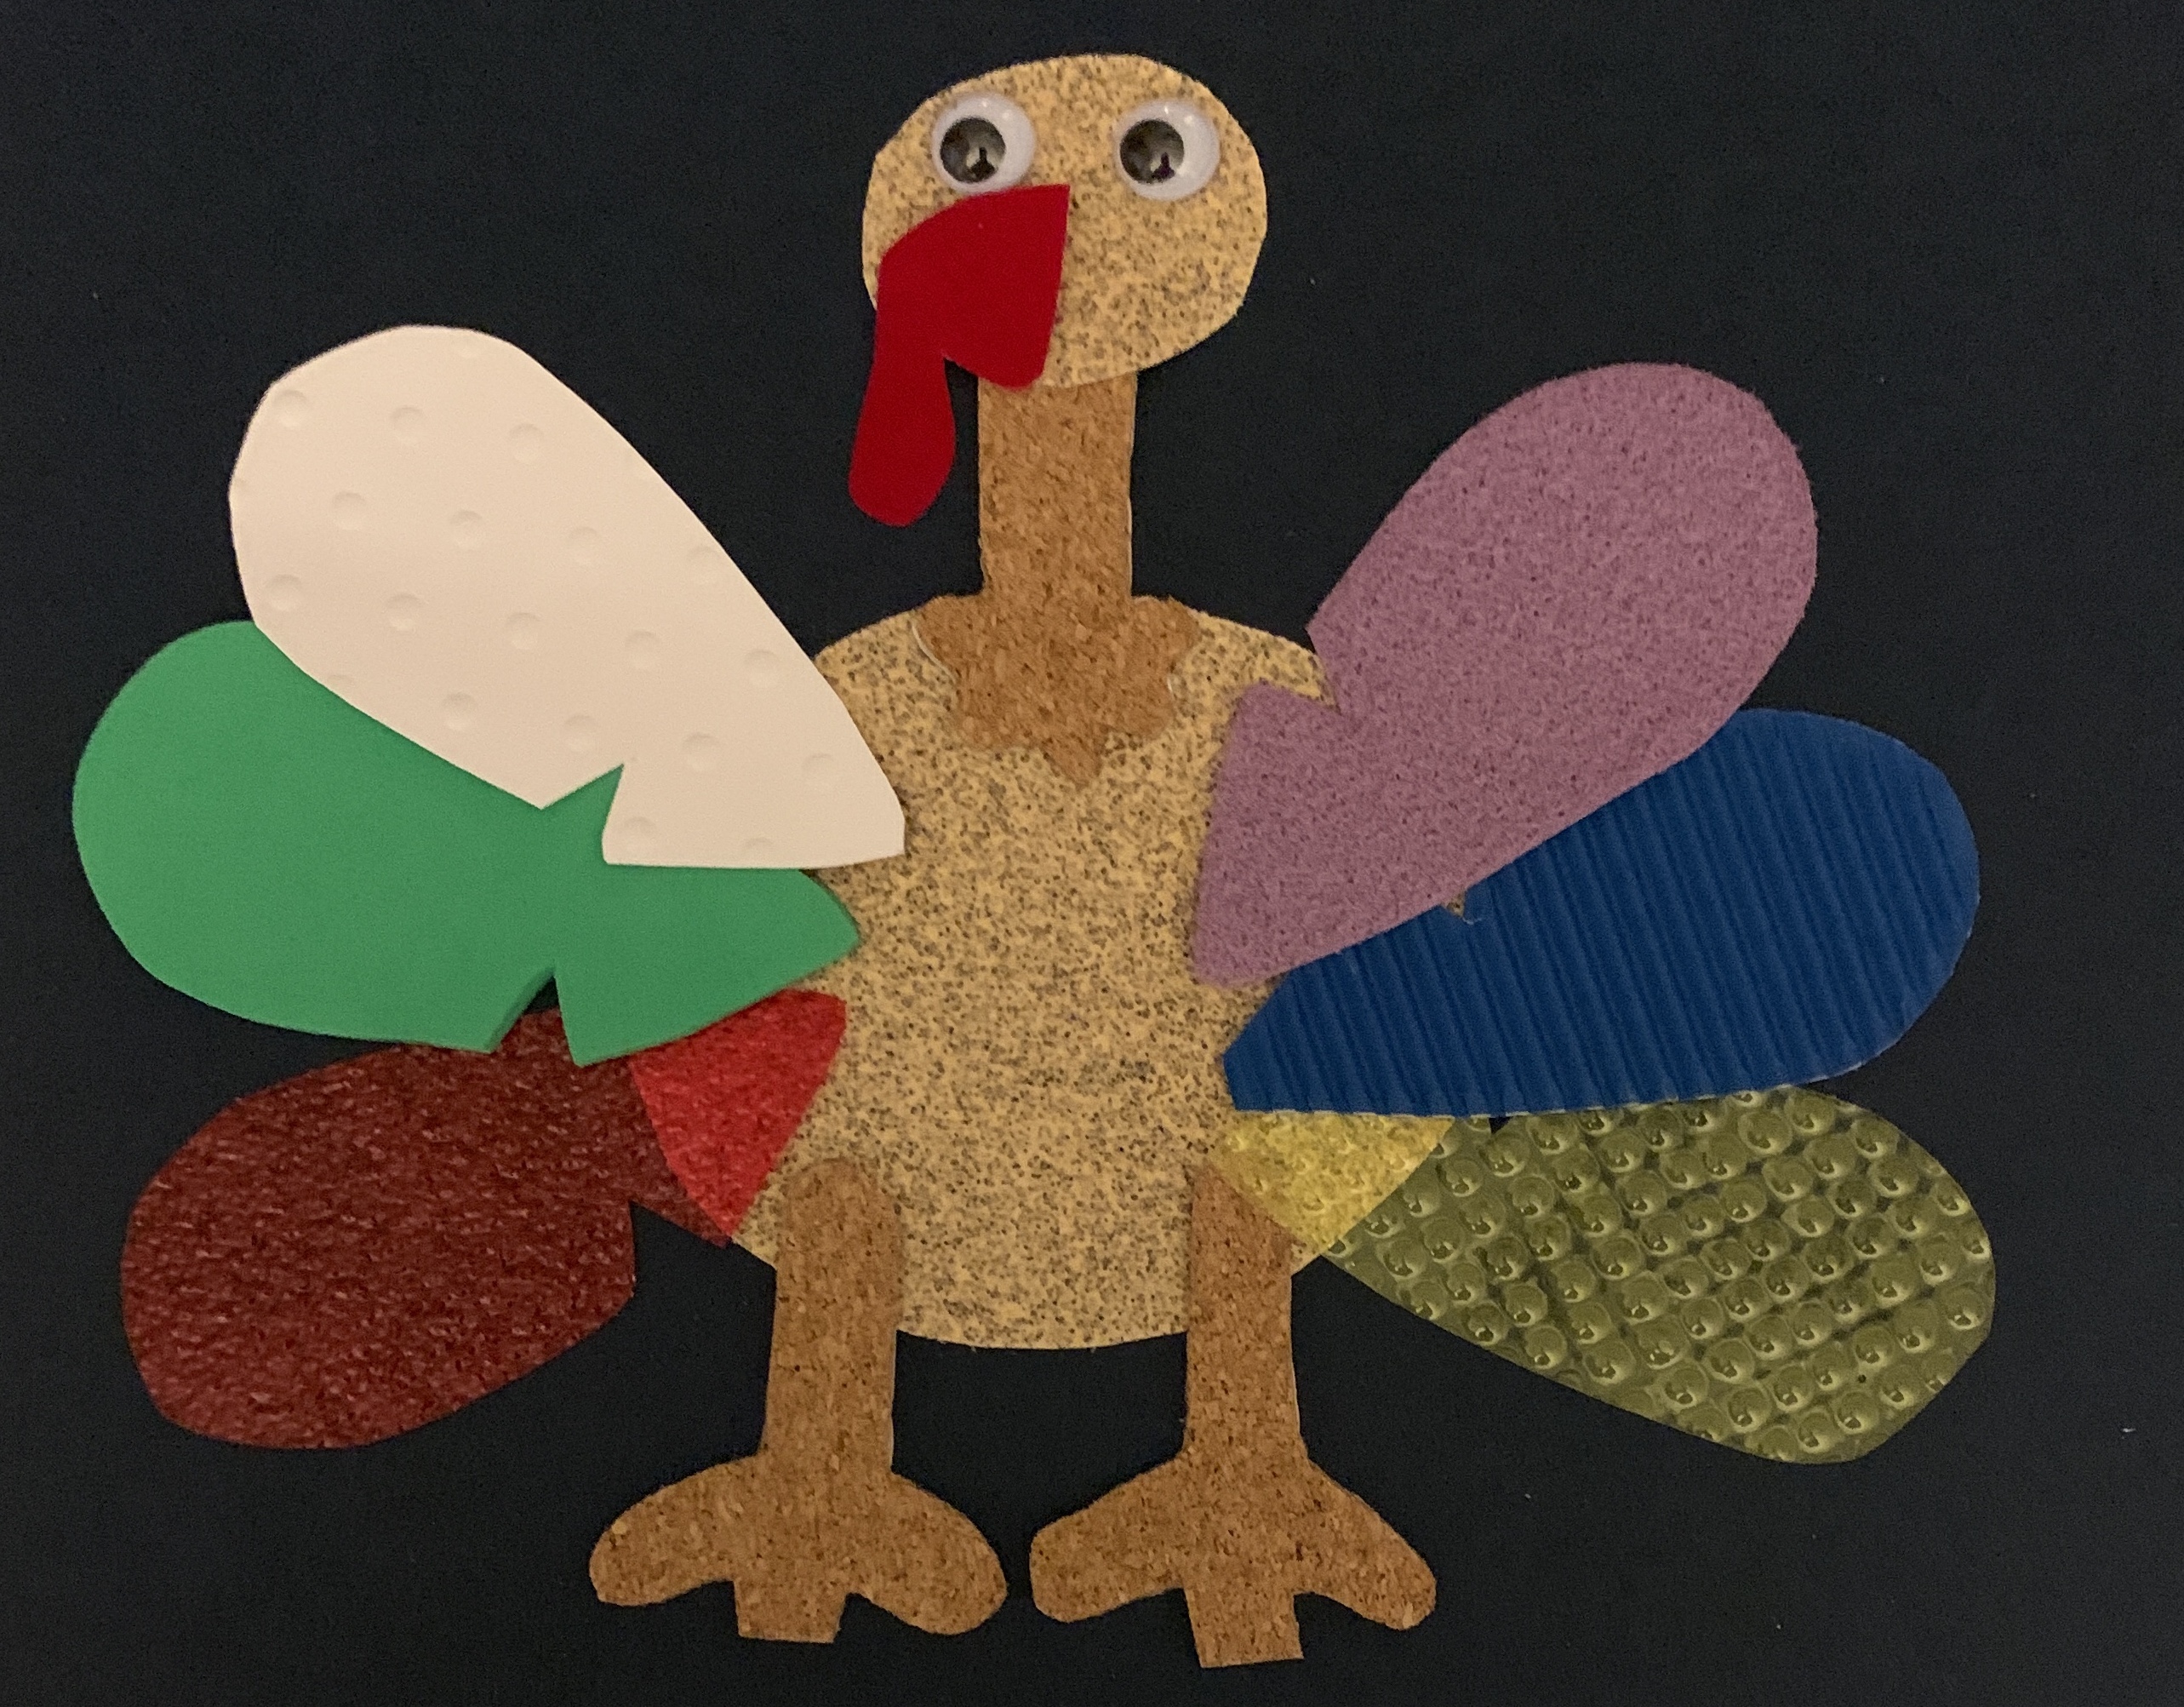 Tactile turkey with sandpaper body and textured feathers